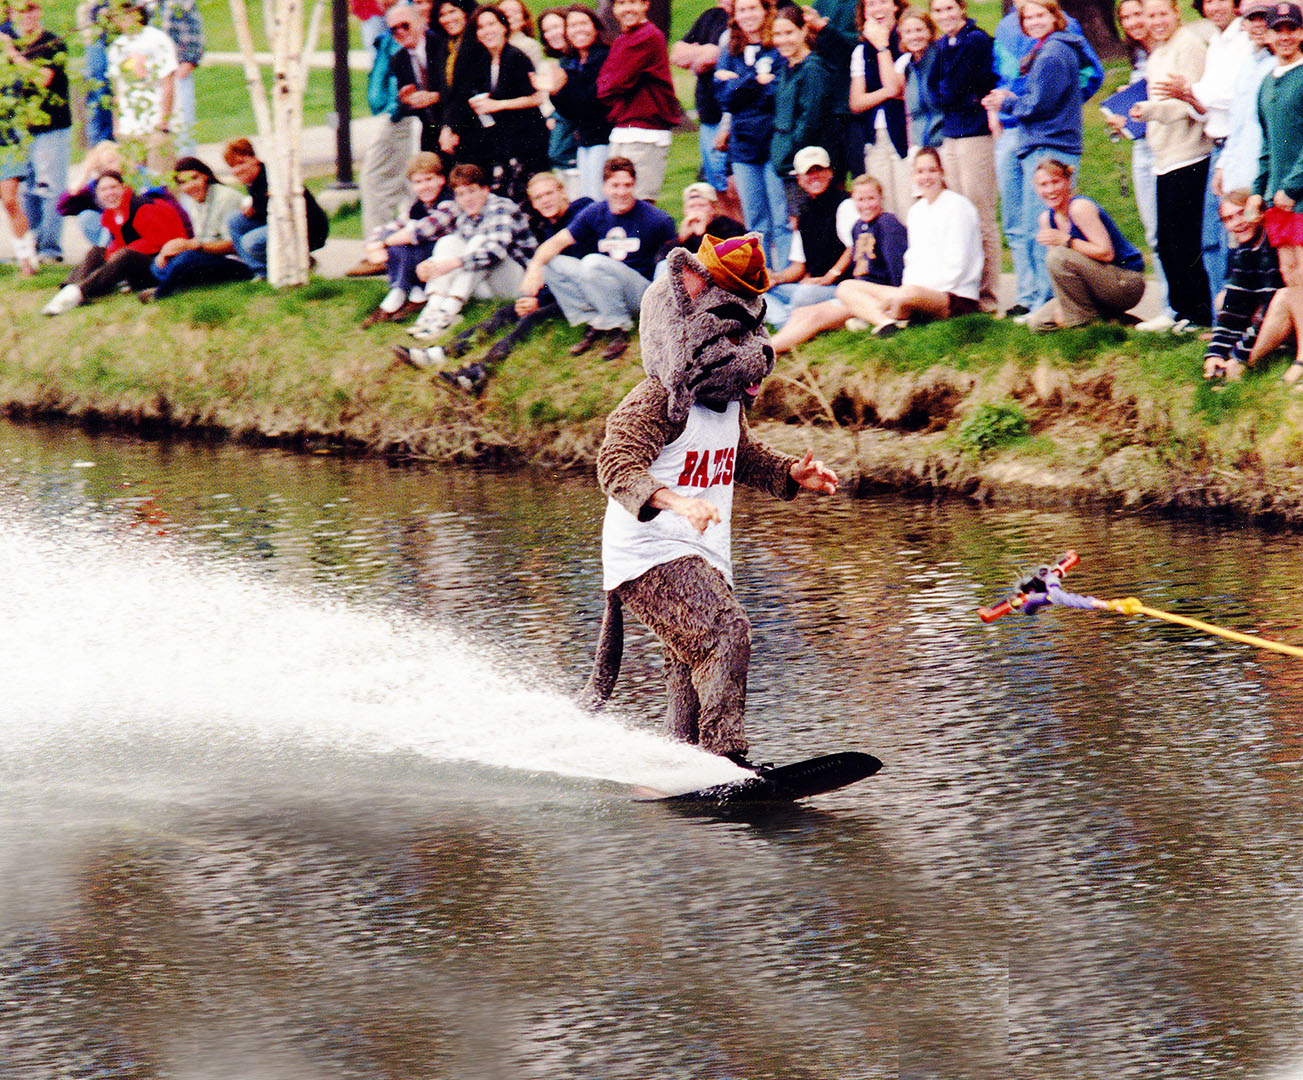 Video: The Bobcat’s 1997 waterskiing trek across Lake Andrews and into college lore